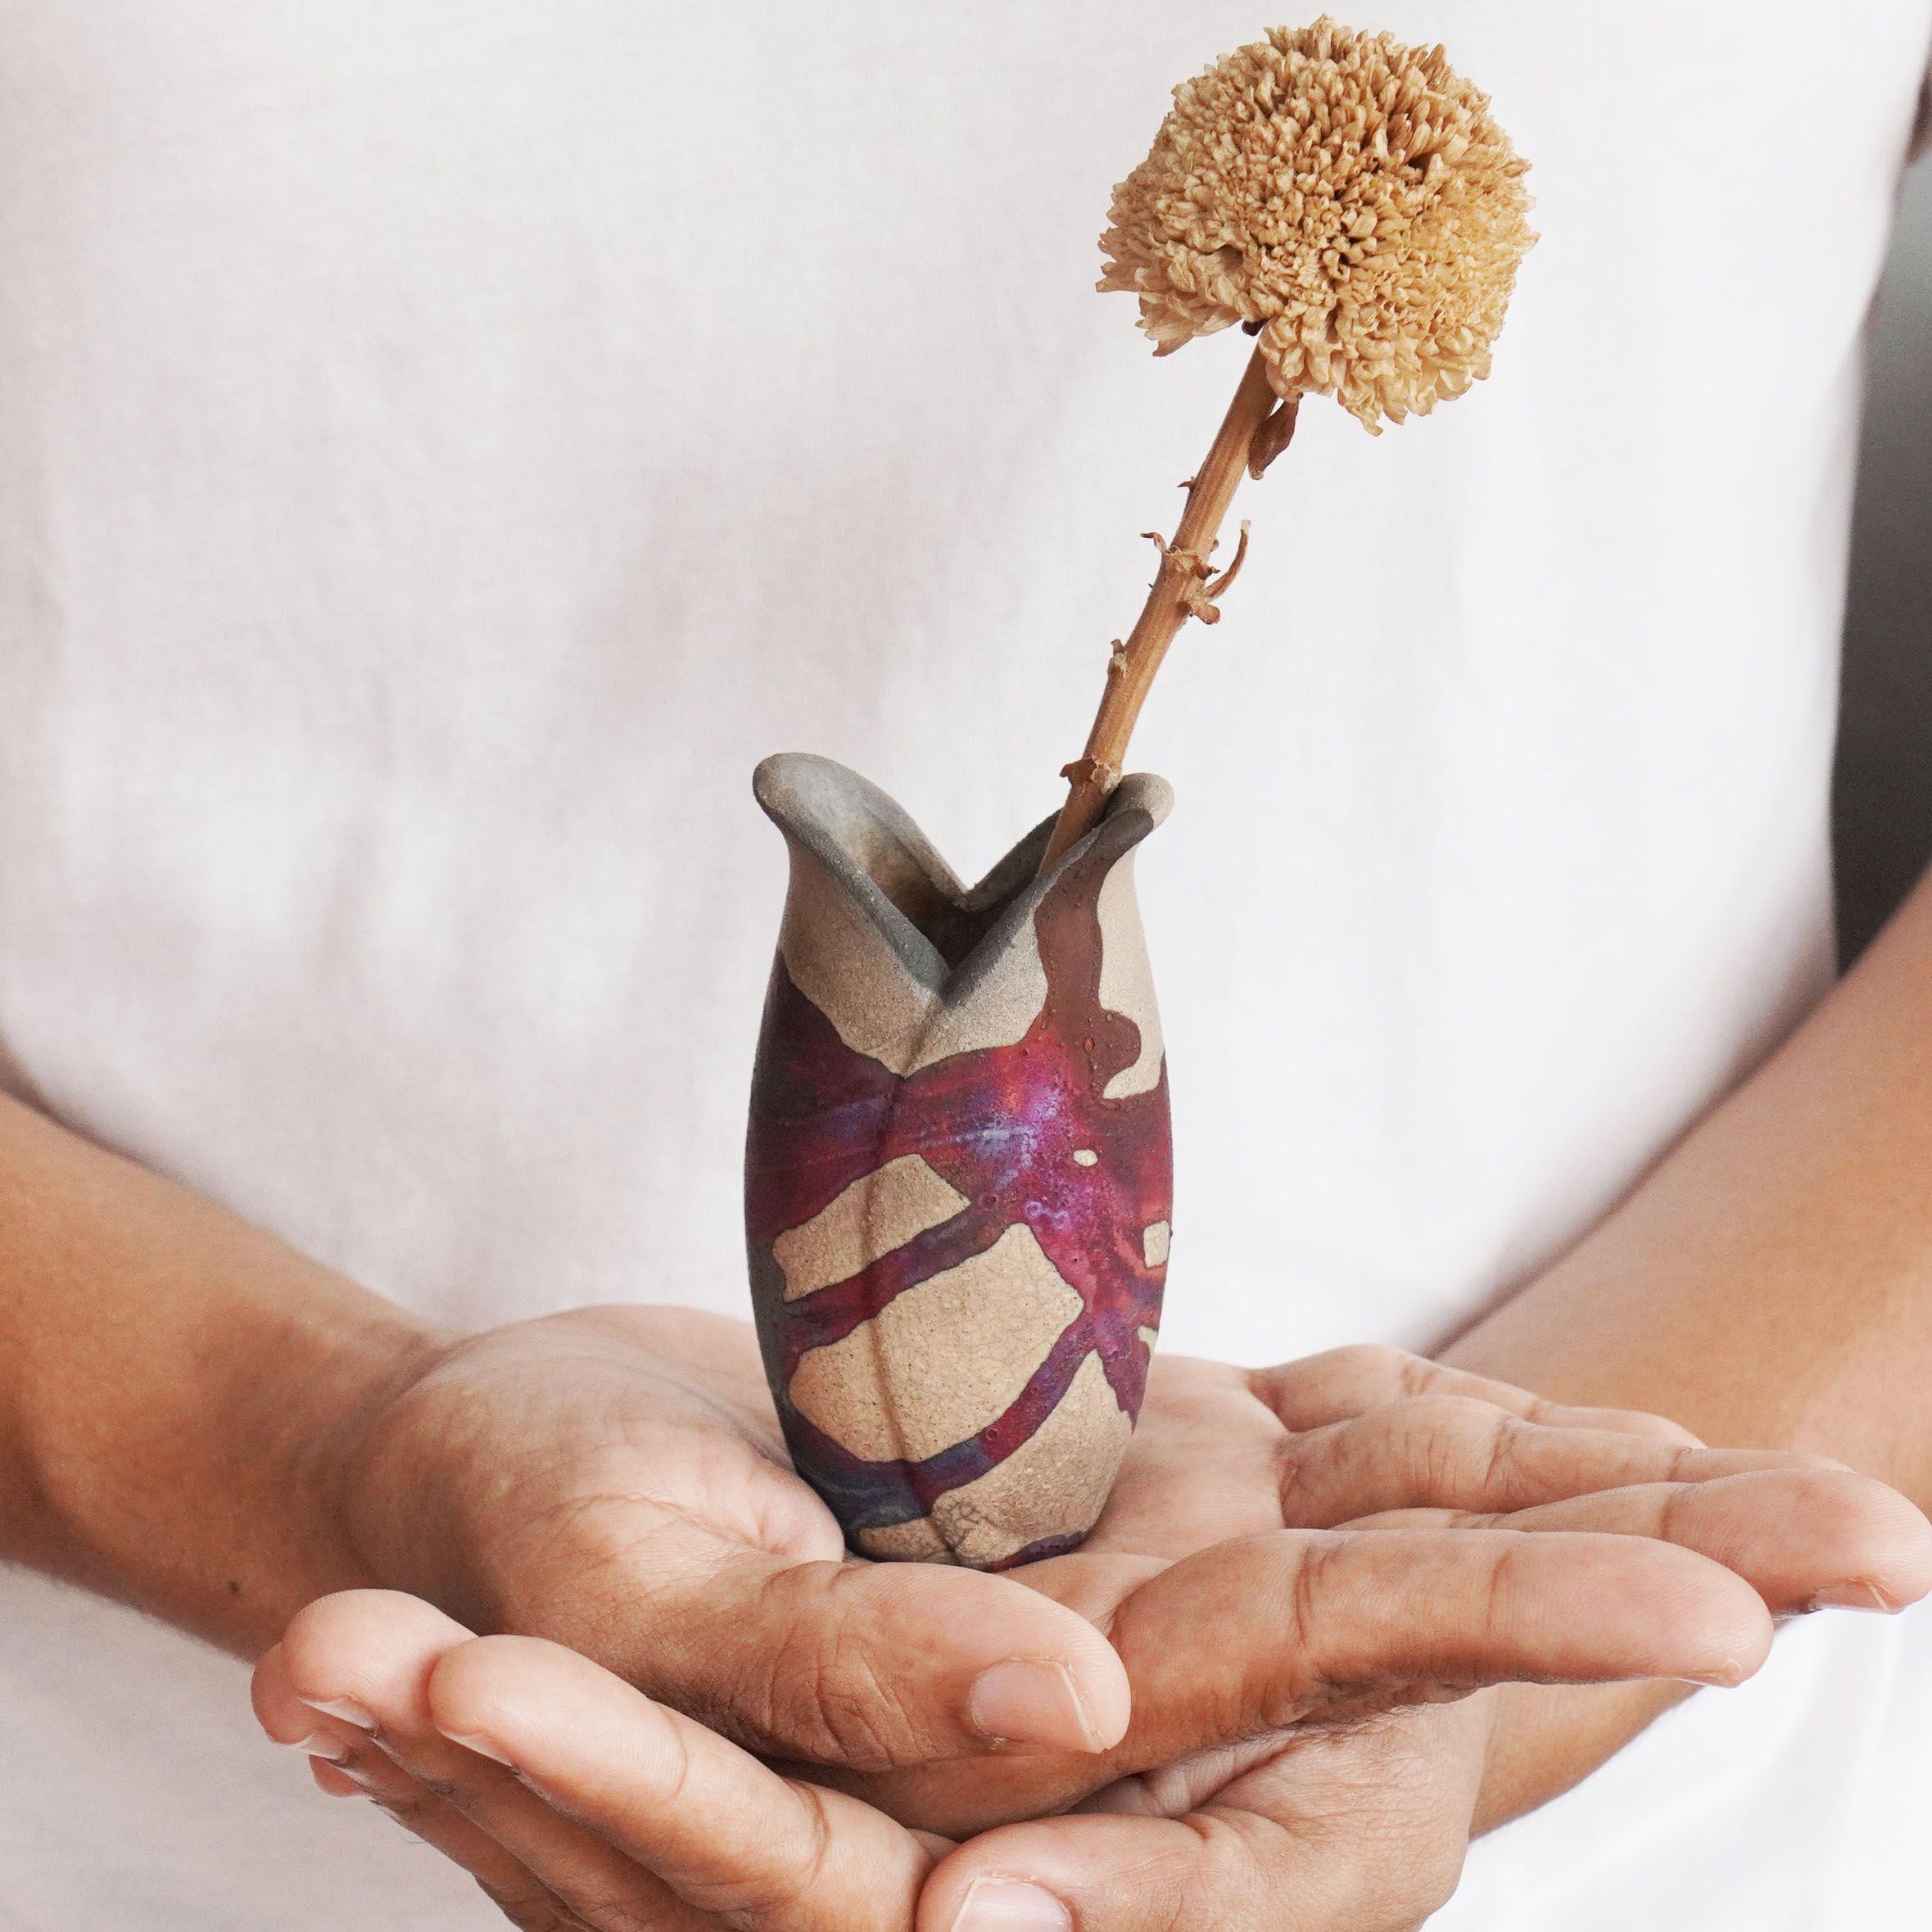 Hana F ~ 花 Flower 

Our Hana F mini raku vase is clay representation of a tulip flower. Two overlapping petals form the body of this mini vase. This vase makes for an adorable gift or a tabletop decorative piece that truly stands out. Each piece is